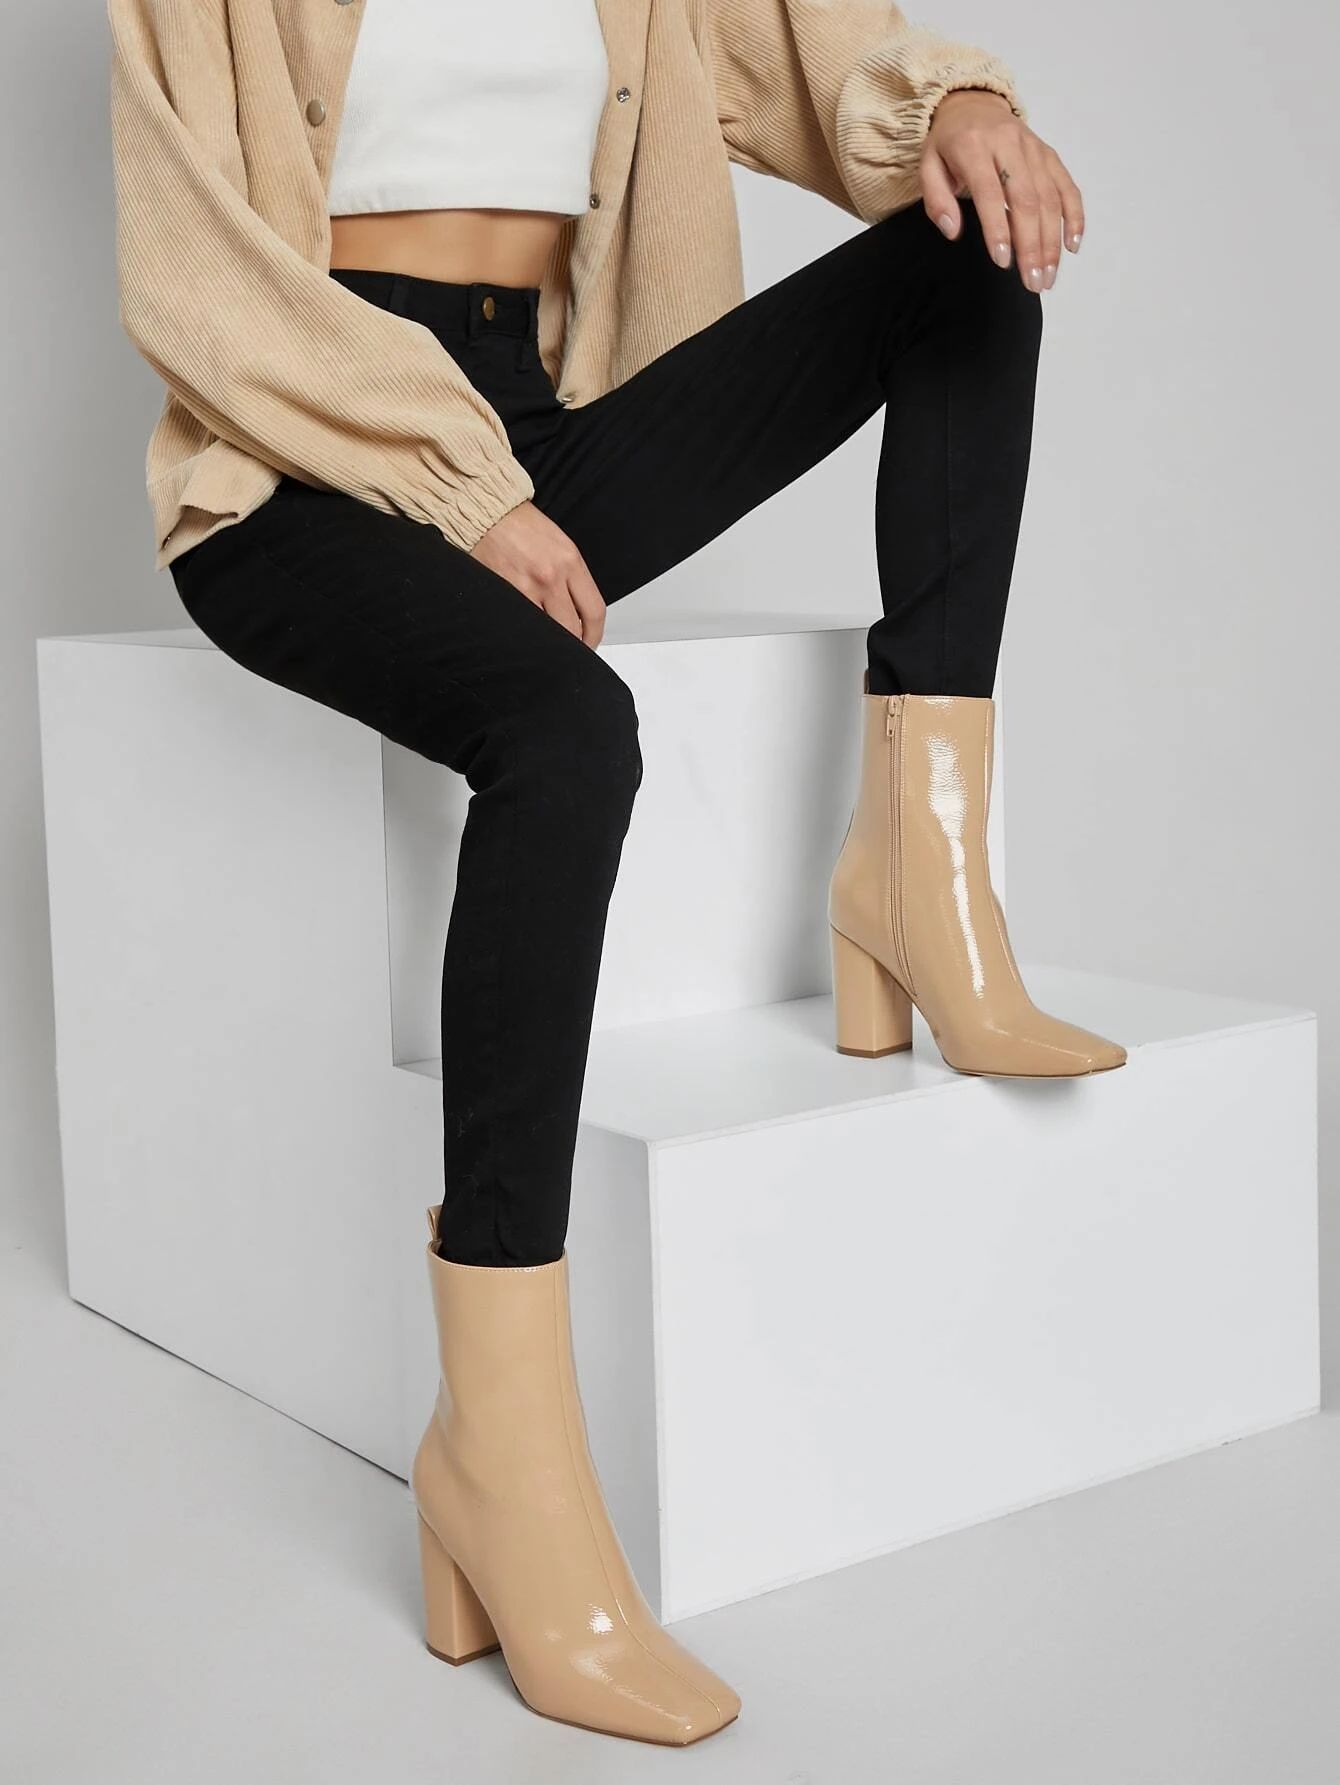 Faux Patent Leather Zippered High Heeled Boots | SHEIN